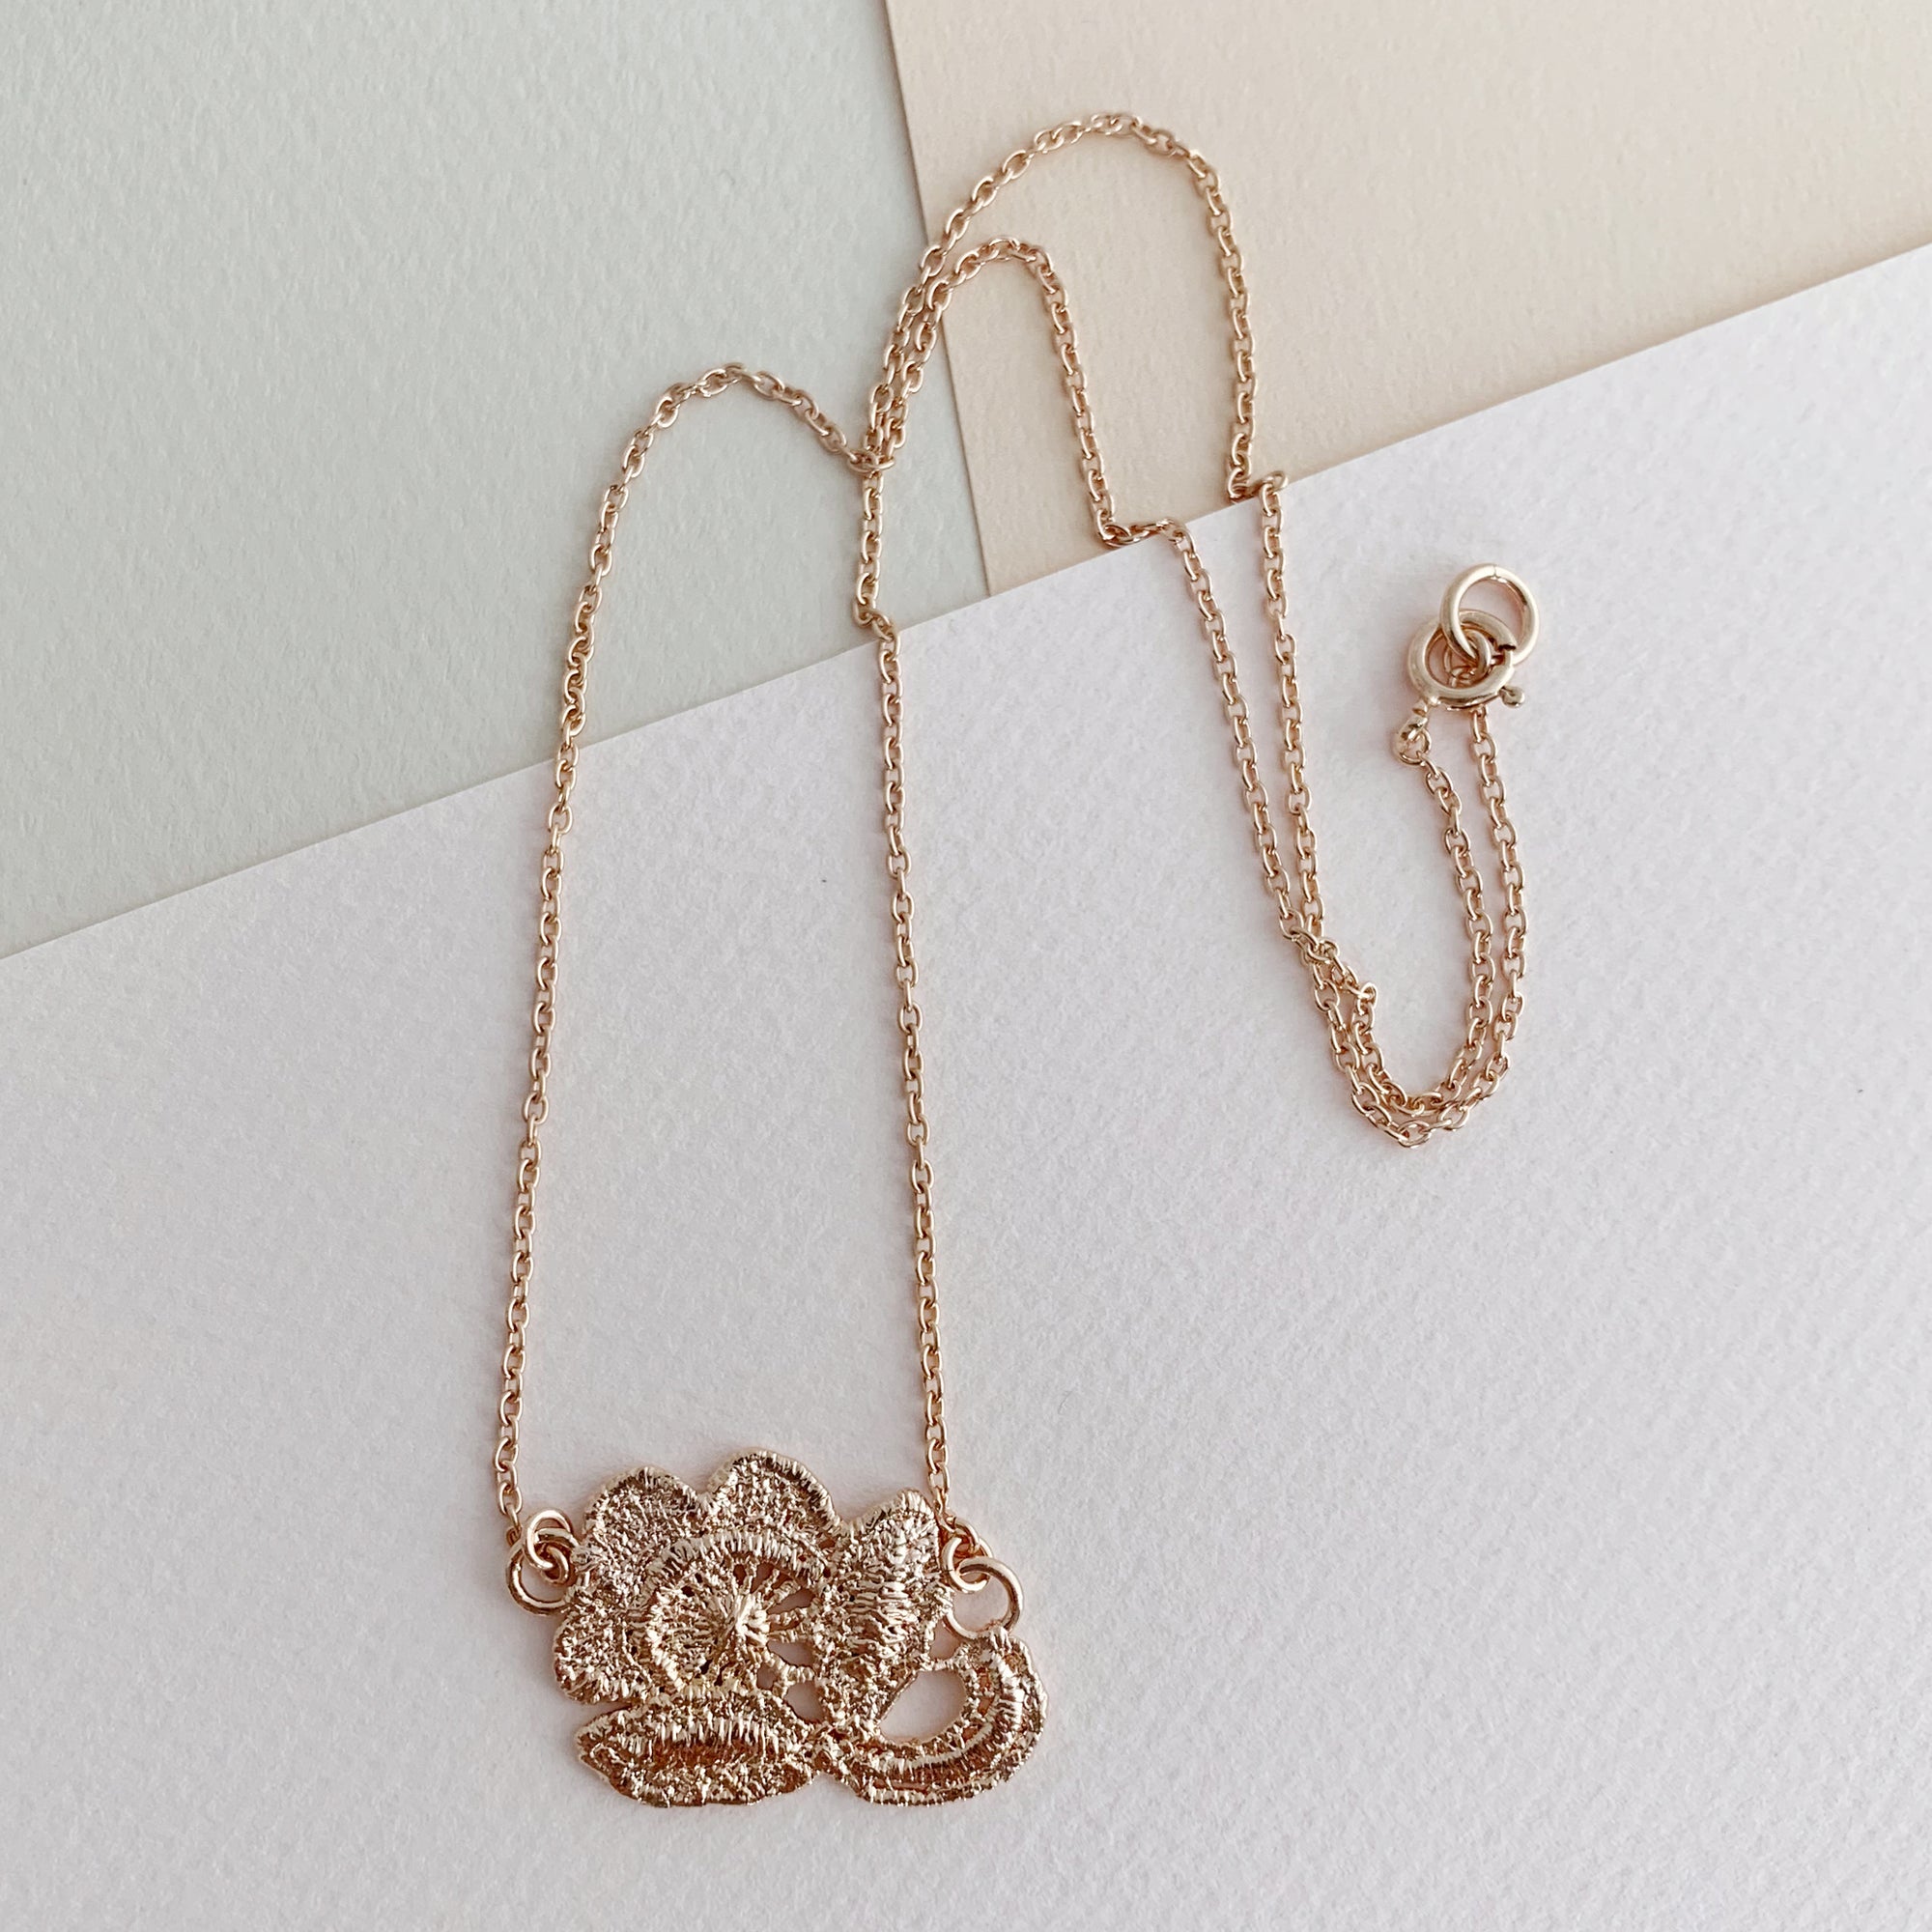 Fine lace rose necklace in 24k gold.